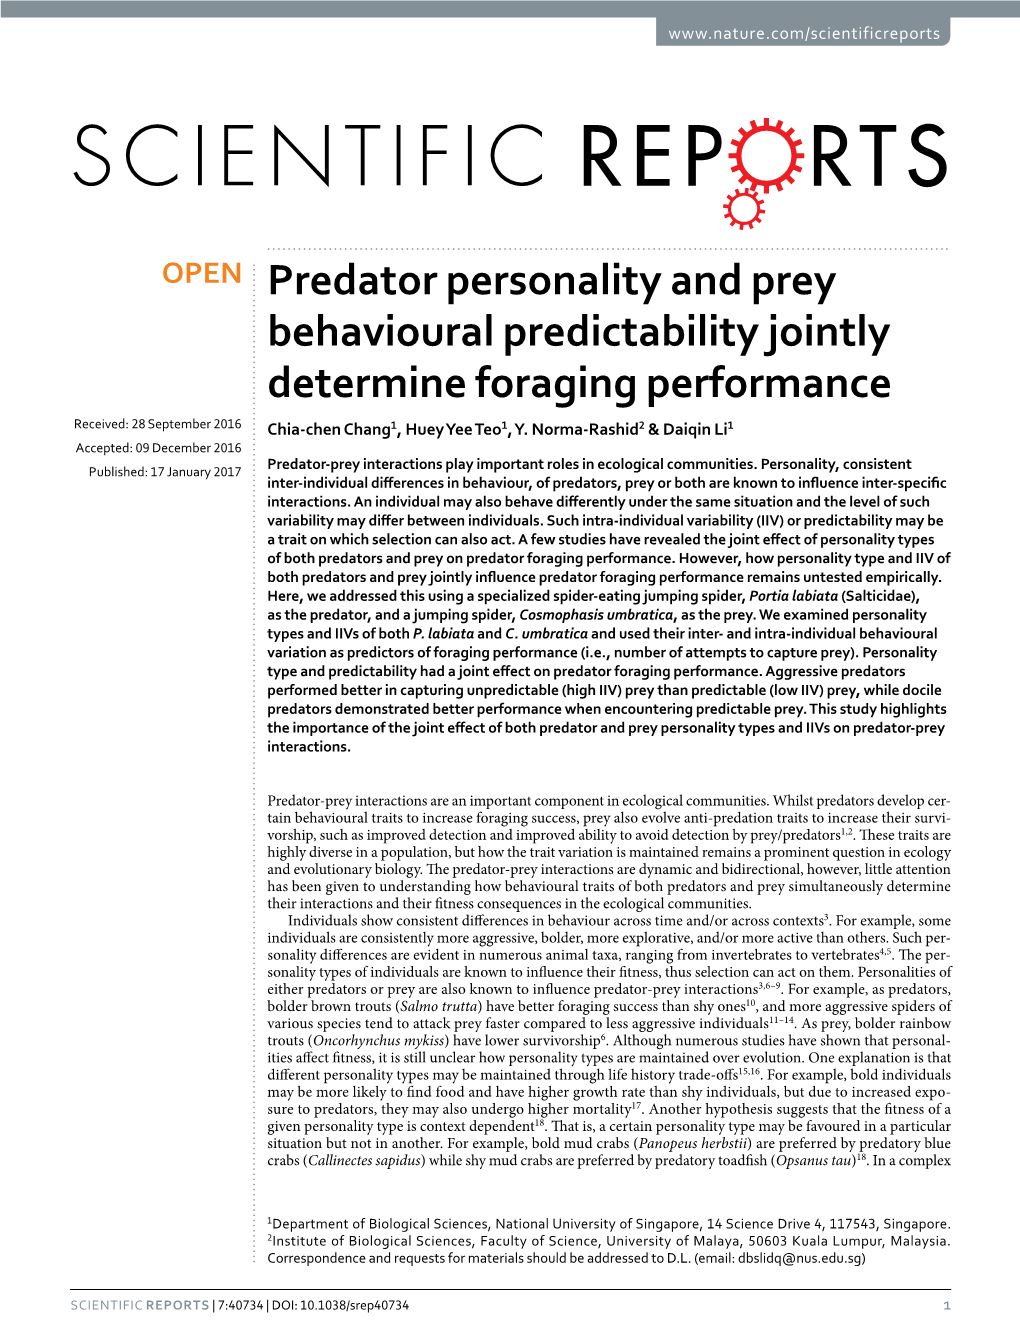 Predator Personality and Prey Behavioural Predictability Jointly Determine Foraging Performance Received: 28 September 2016 Chia-Chen Chang1, Huey Yee Teo1, Y